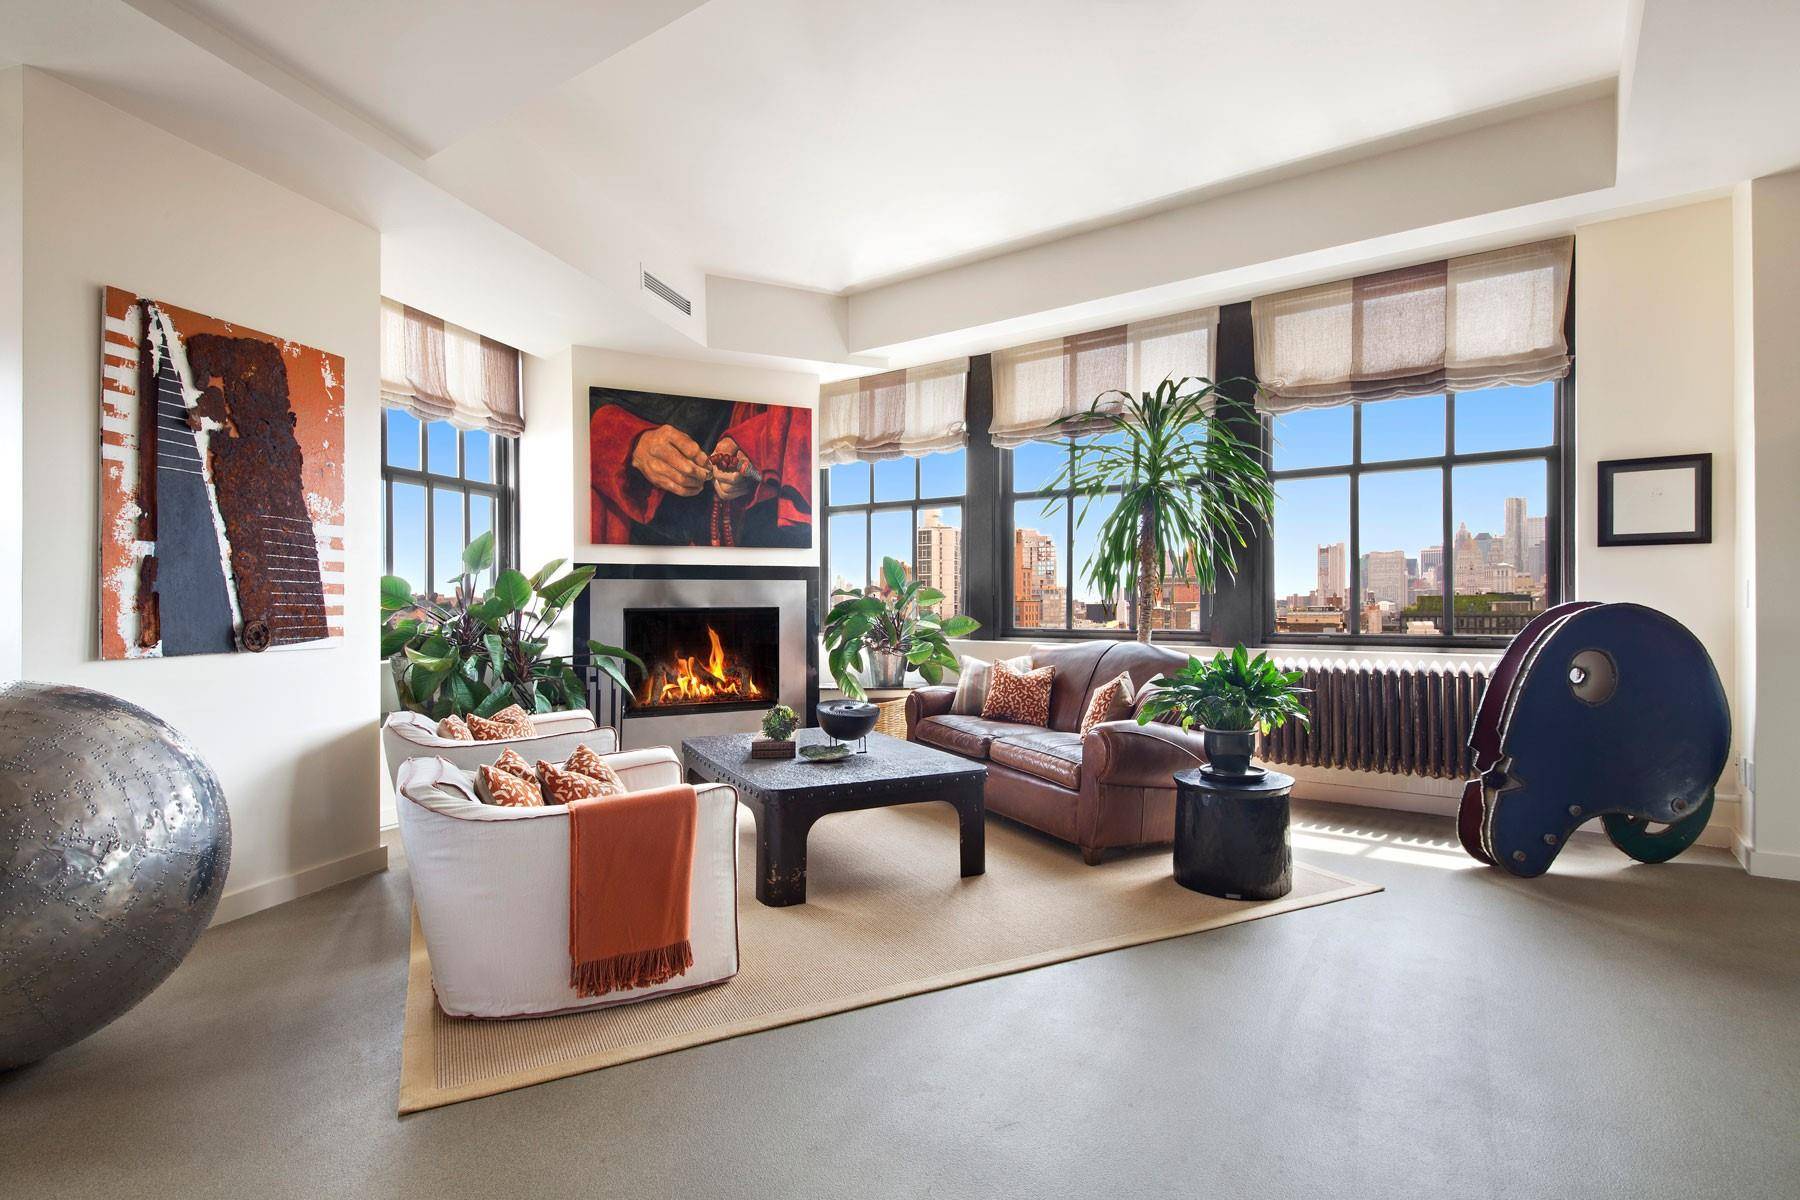 Penthouse 12B at 62 Cooper Square, in Historic NoHo, covers approximately 3, 000 interior square feet, with an additional 2, 400 square feet of eastern and western facing terraces.